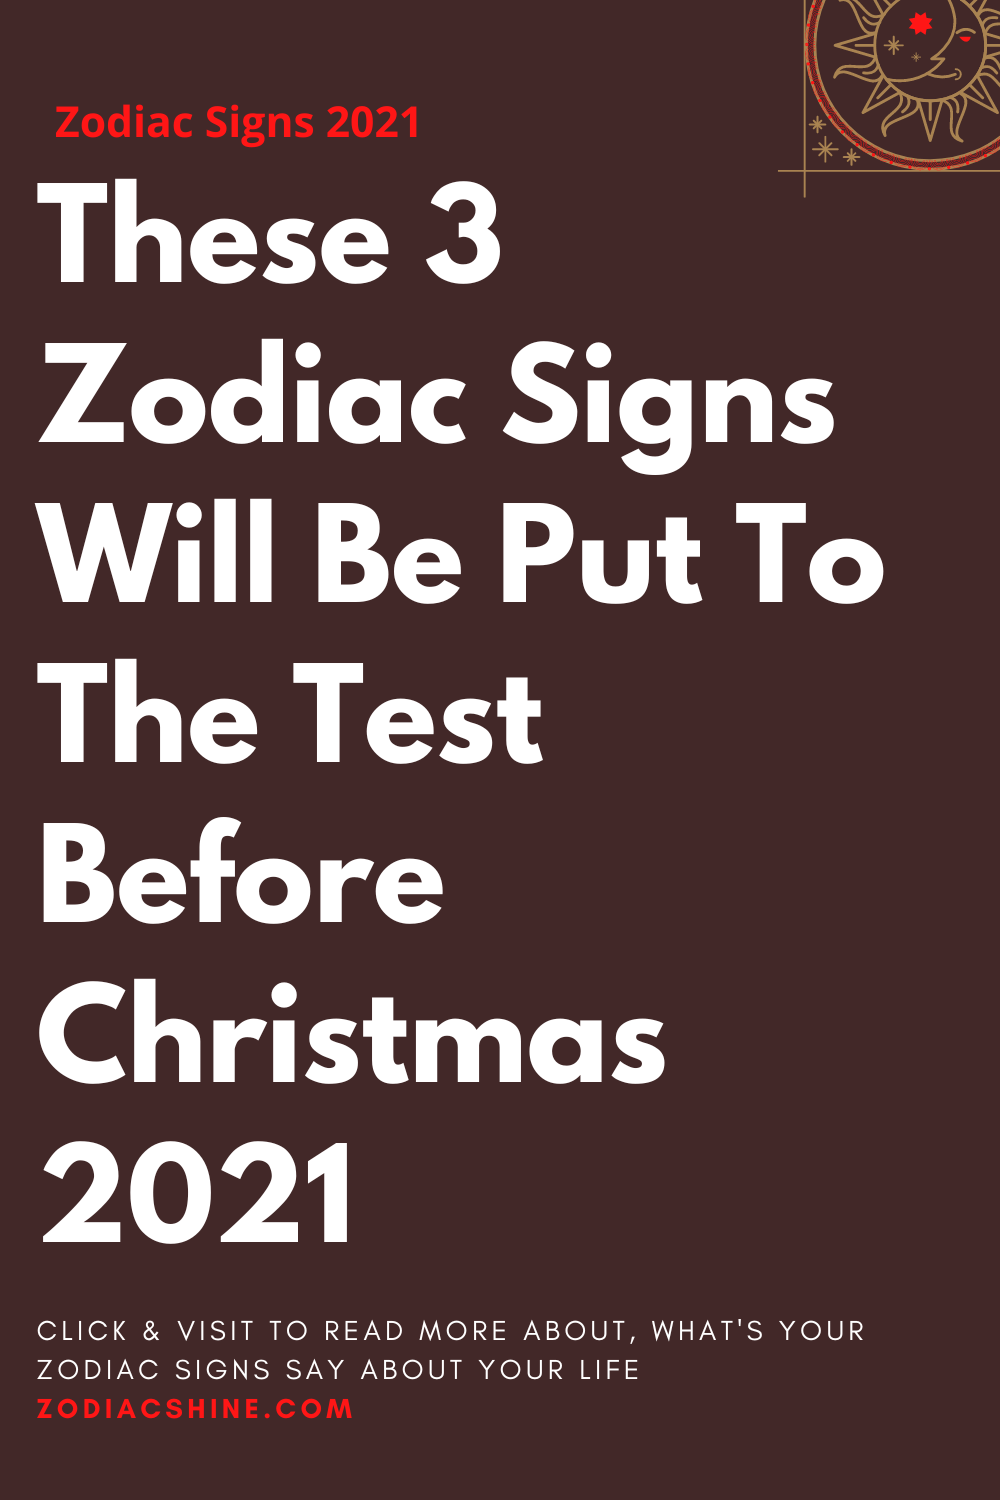 These 3 Zodiac Signs Will Be Put To The Test Before Christmas 2021